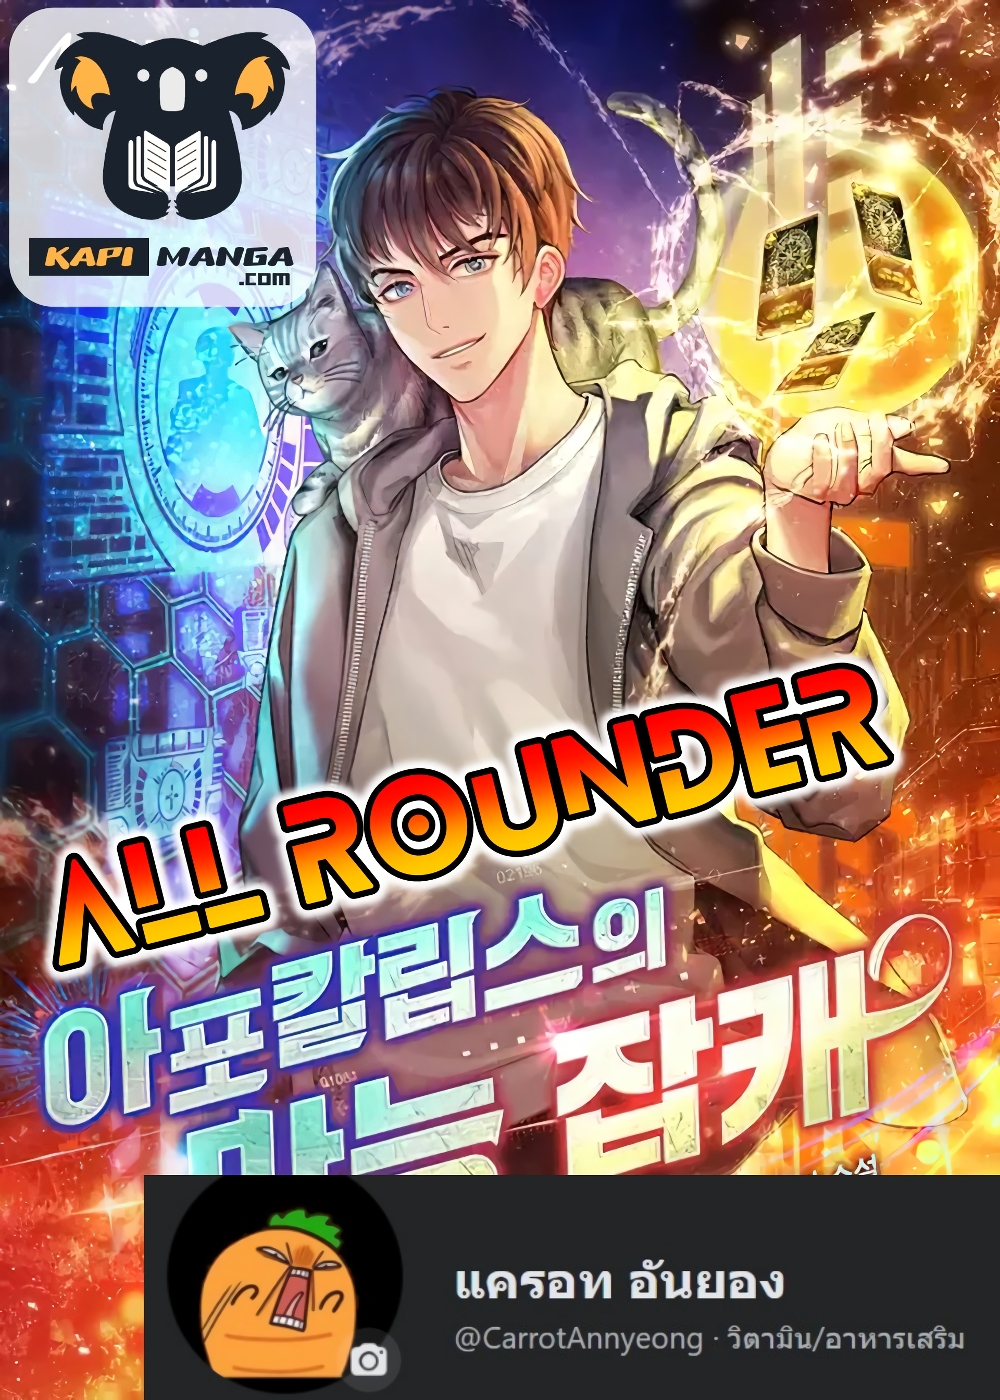 All Rounder4 (1)